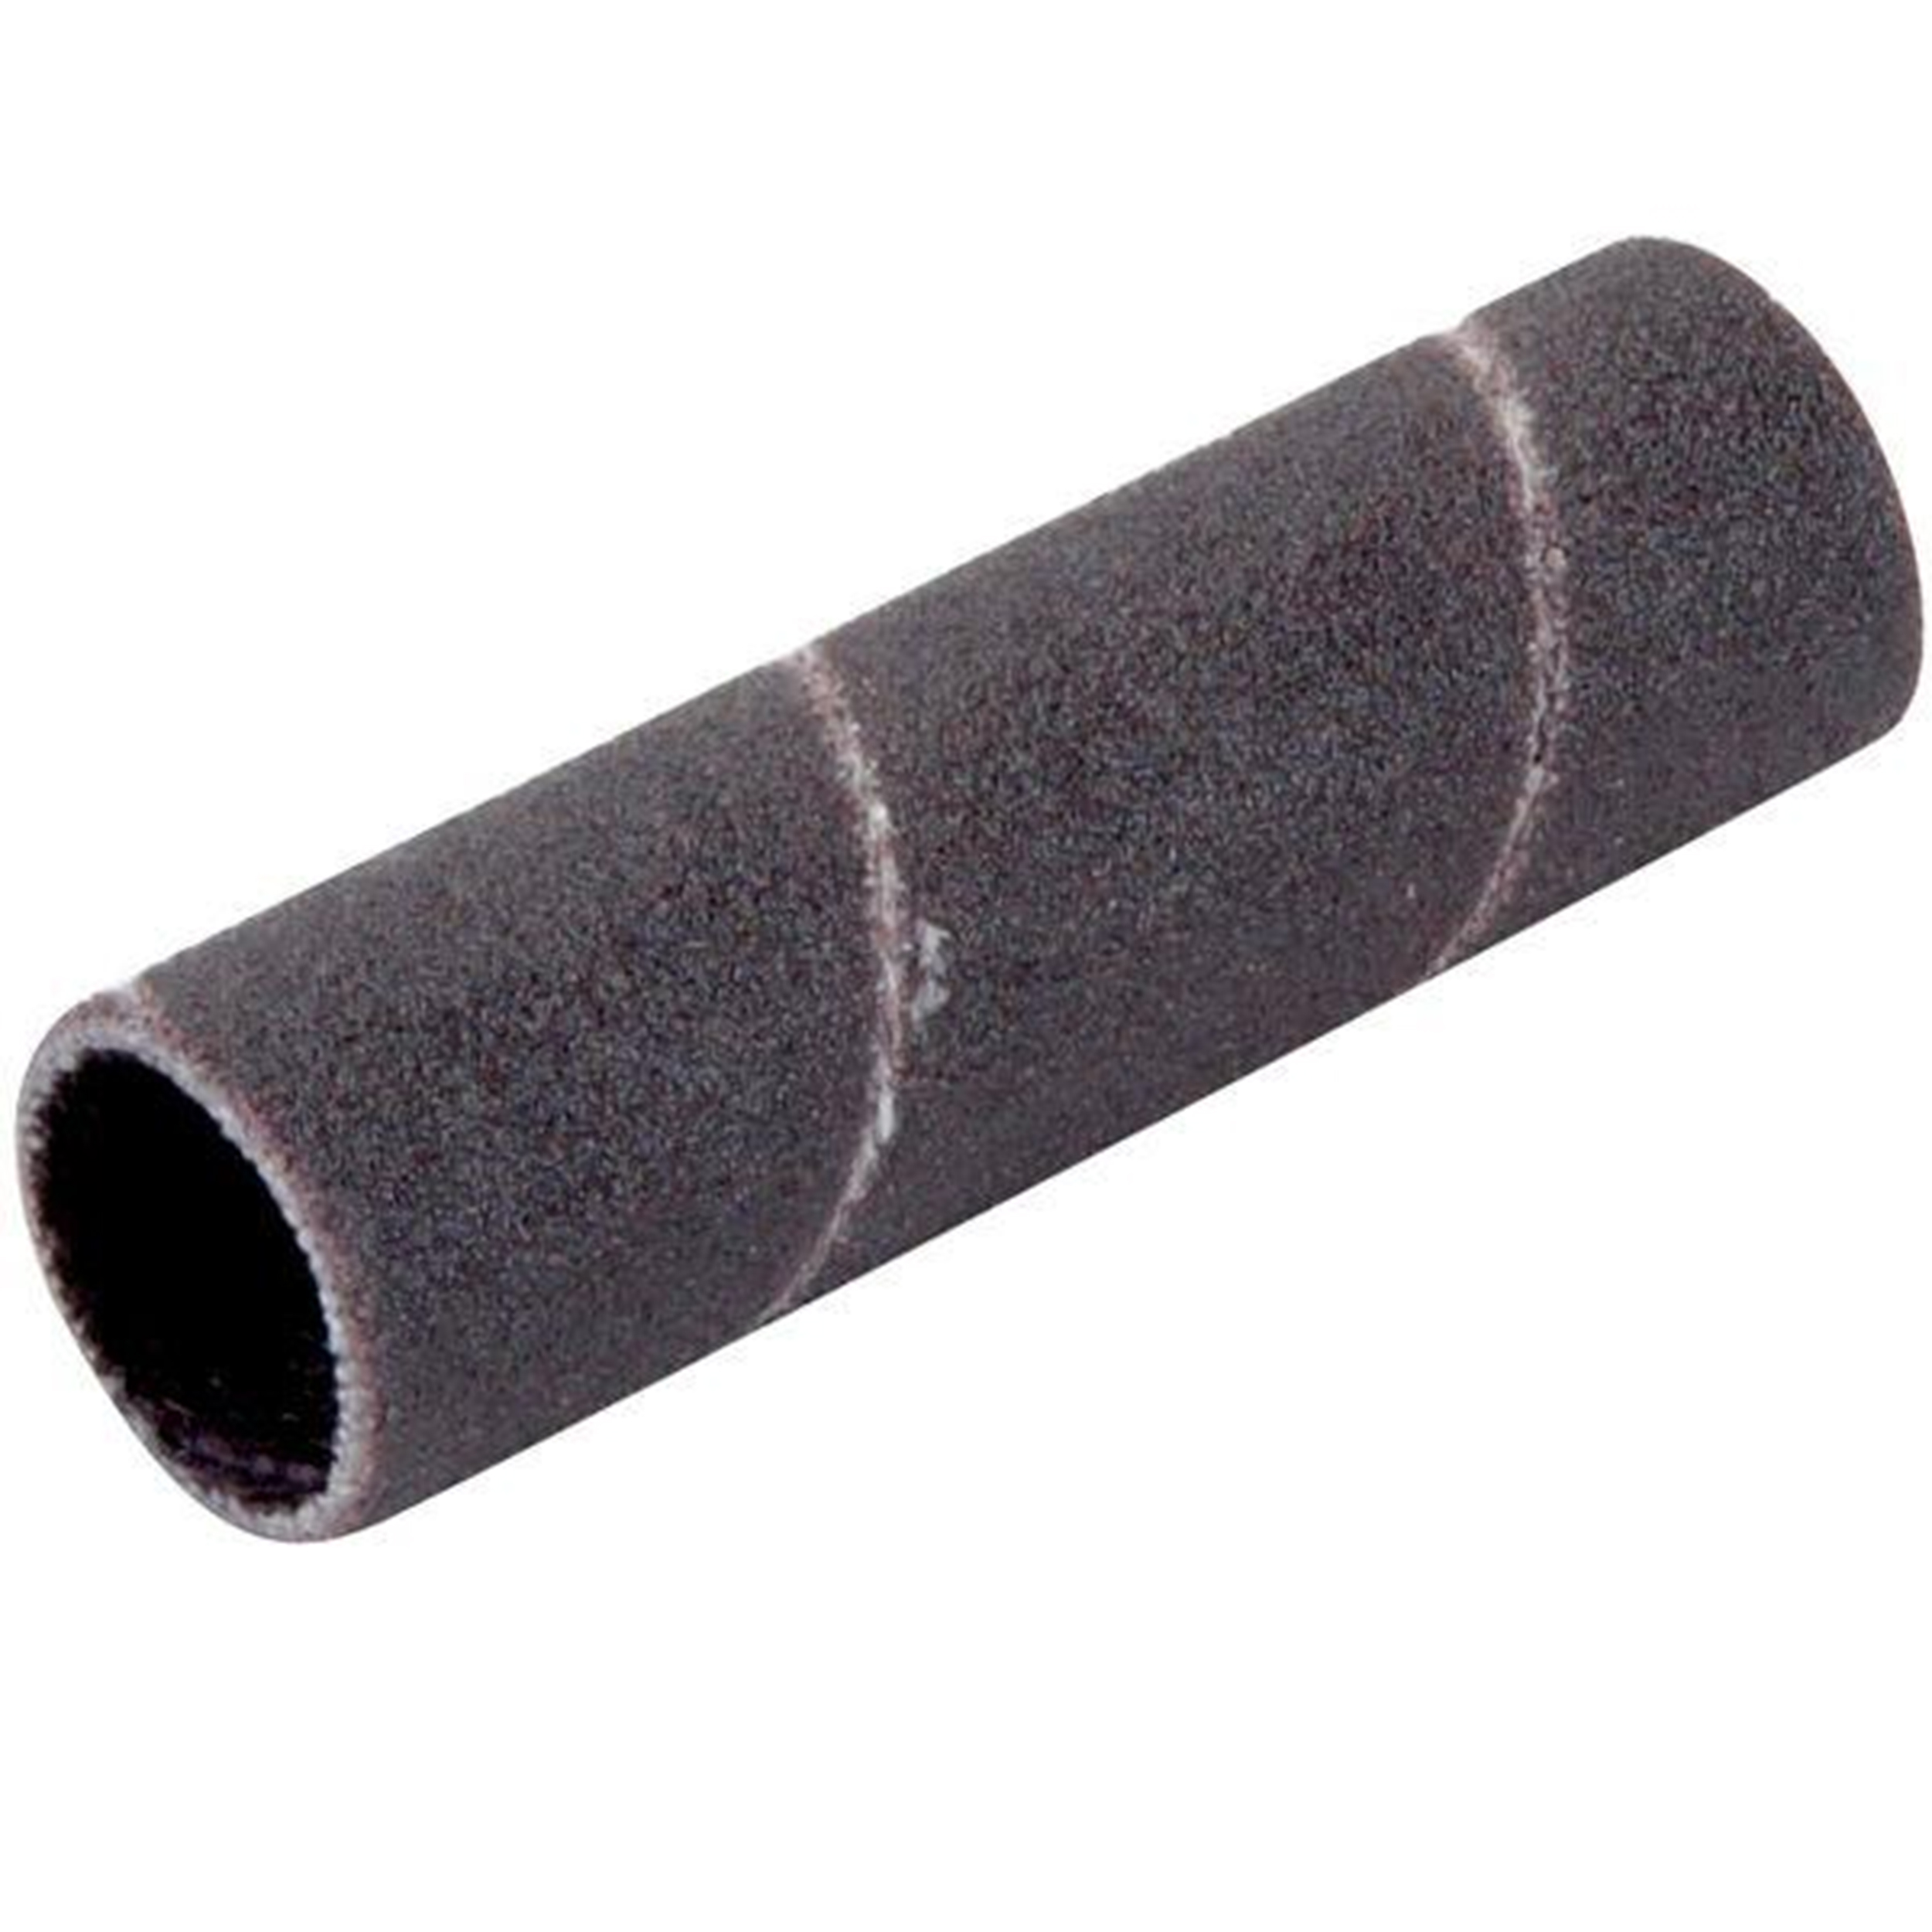 Sanding Drum Replacement Sleeve, 1/2" Dia. X 2" Length, 120 Grit, 12 Pack